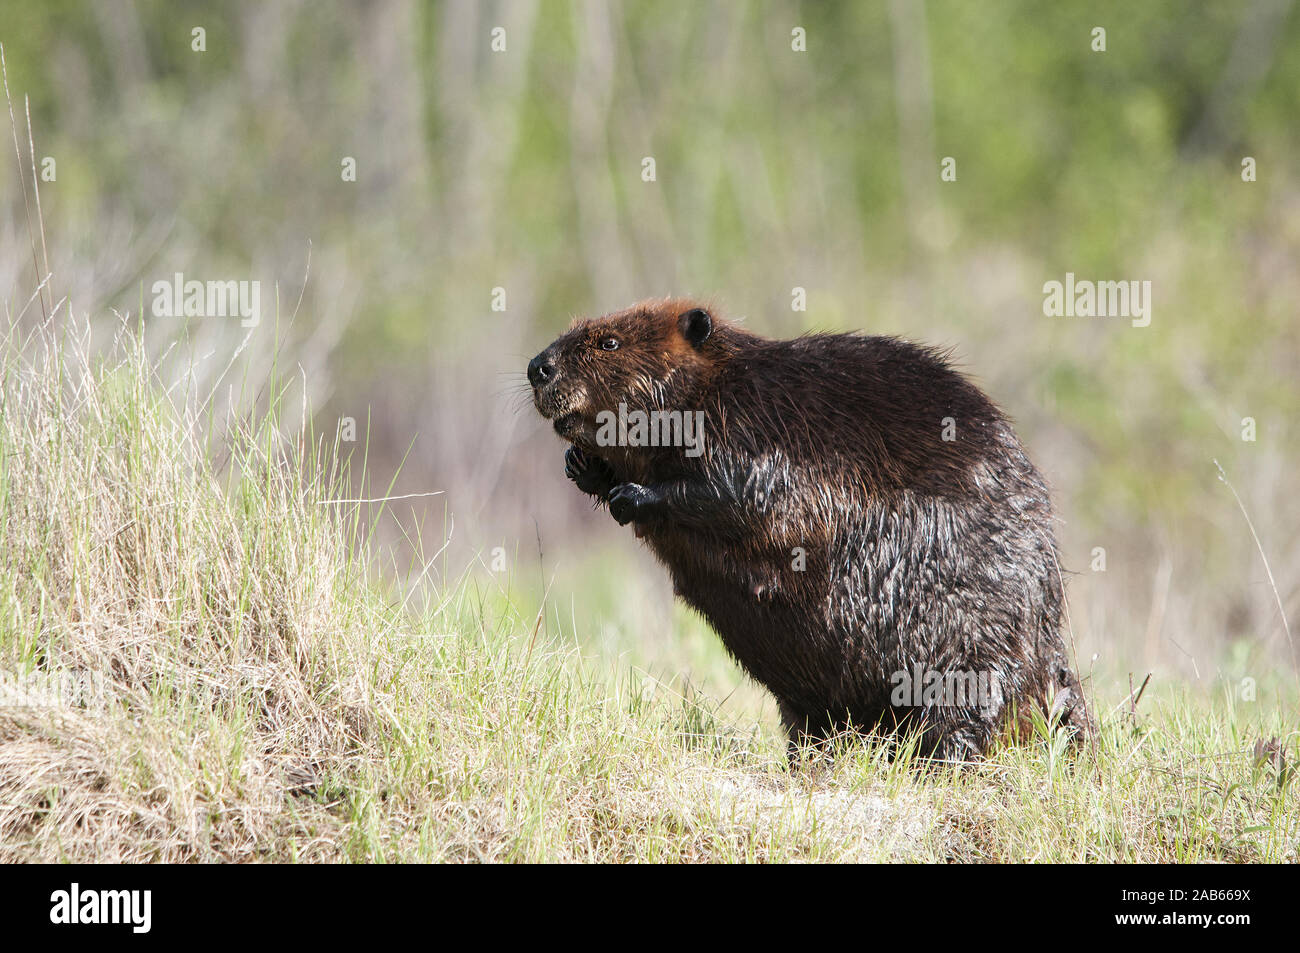 Beaver wild beaver exposing its body, head, eyes, ears, tail with a bokeh background  in its environment and surrounding. Stock Photo